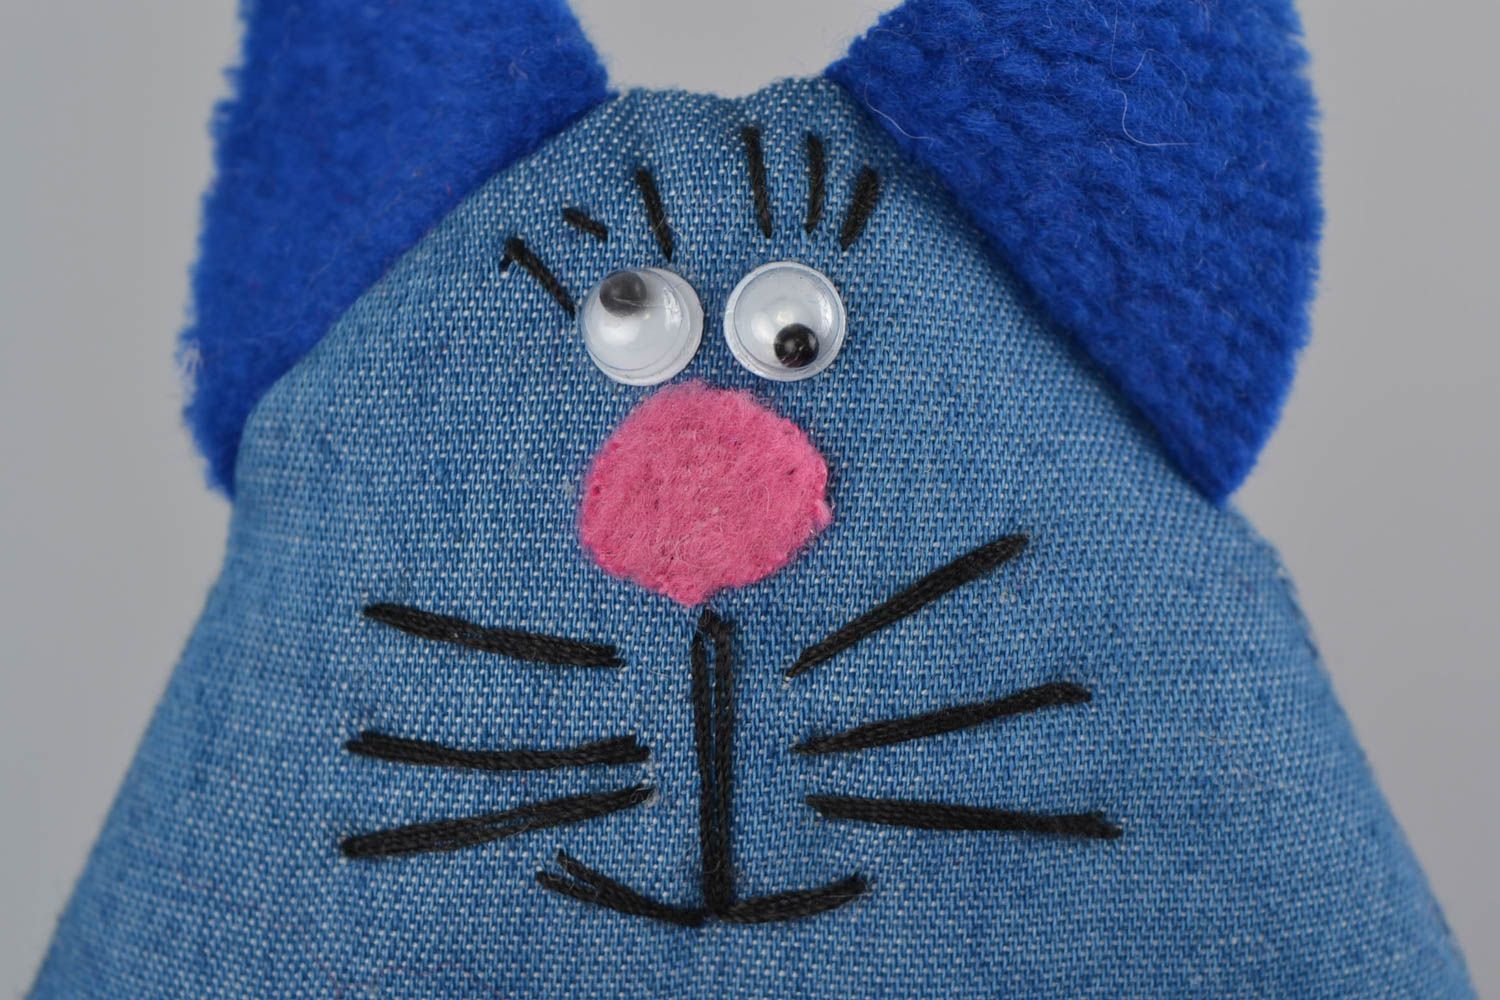 Fleece toy funny blue cat handmade decorative stuffed toy for home decor photo 4